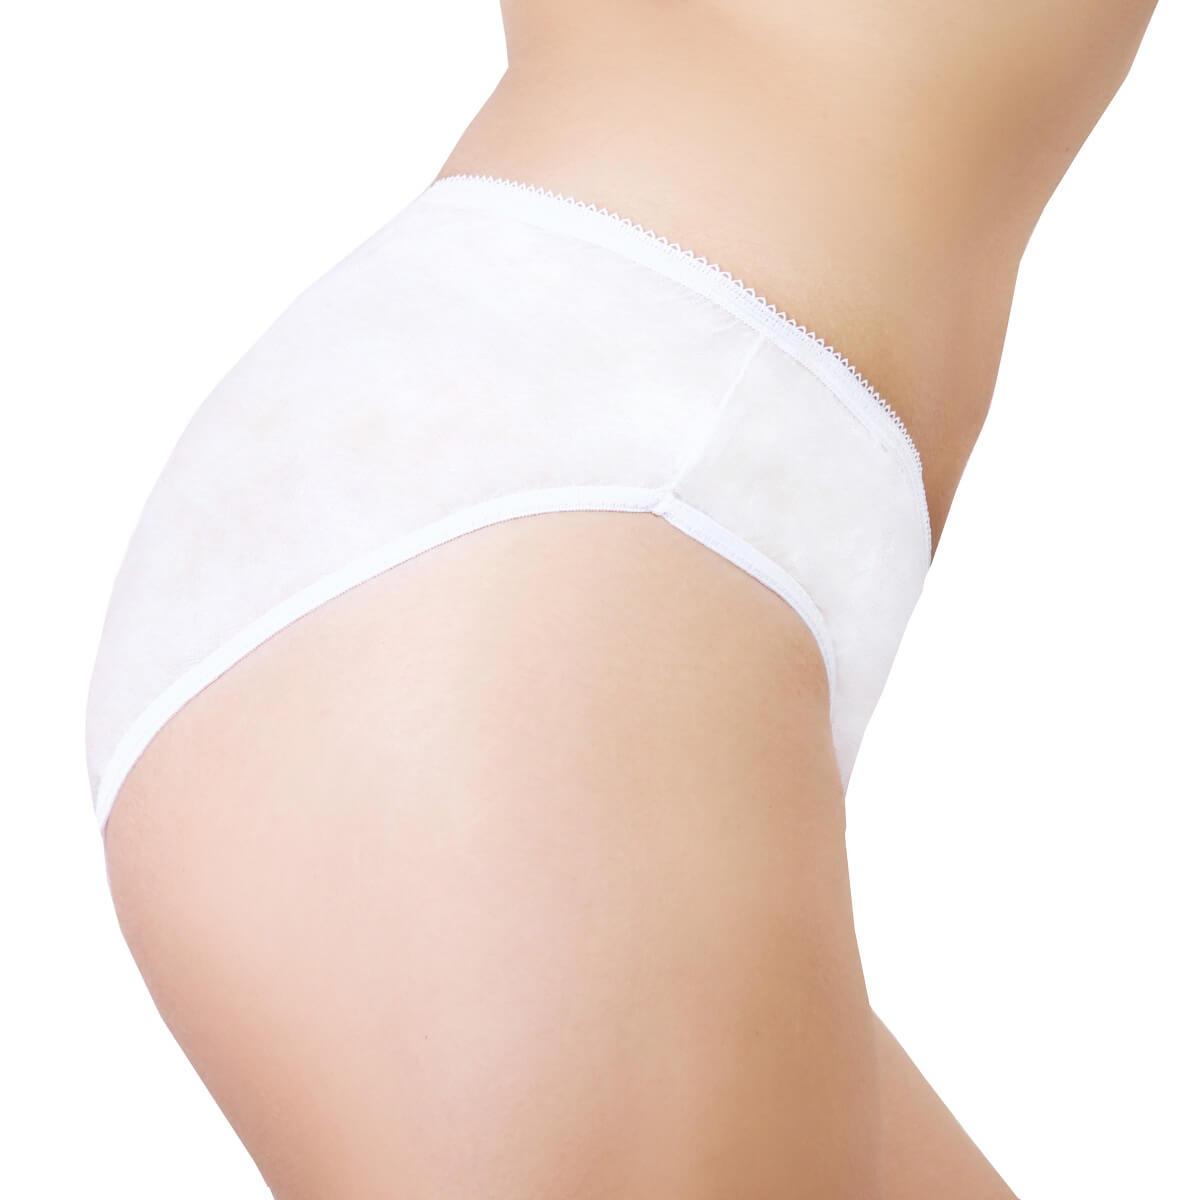 Disposable white travel underwear. Polypro knickers briefs and panties 5pcs